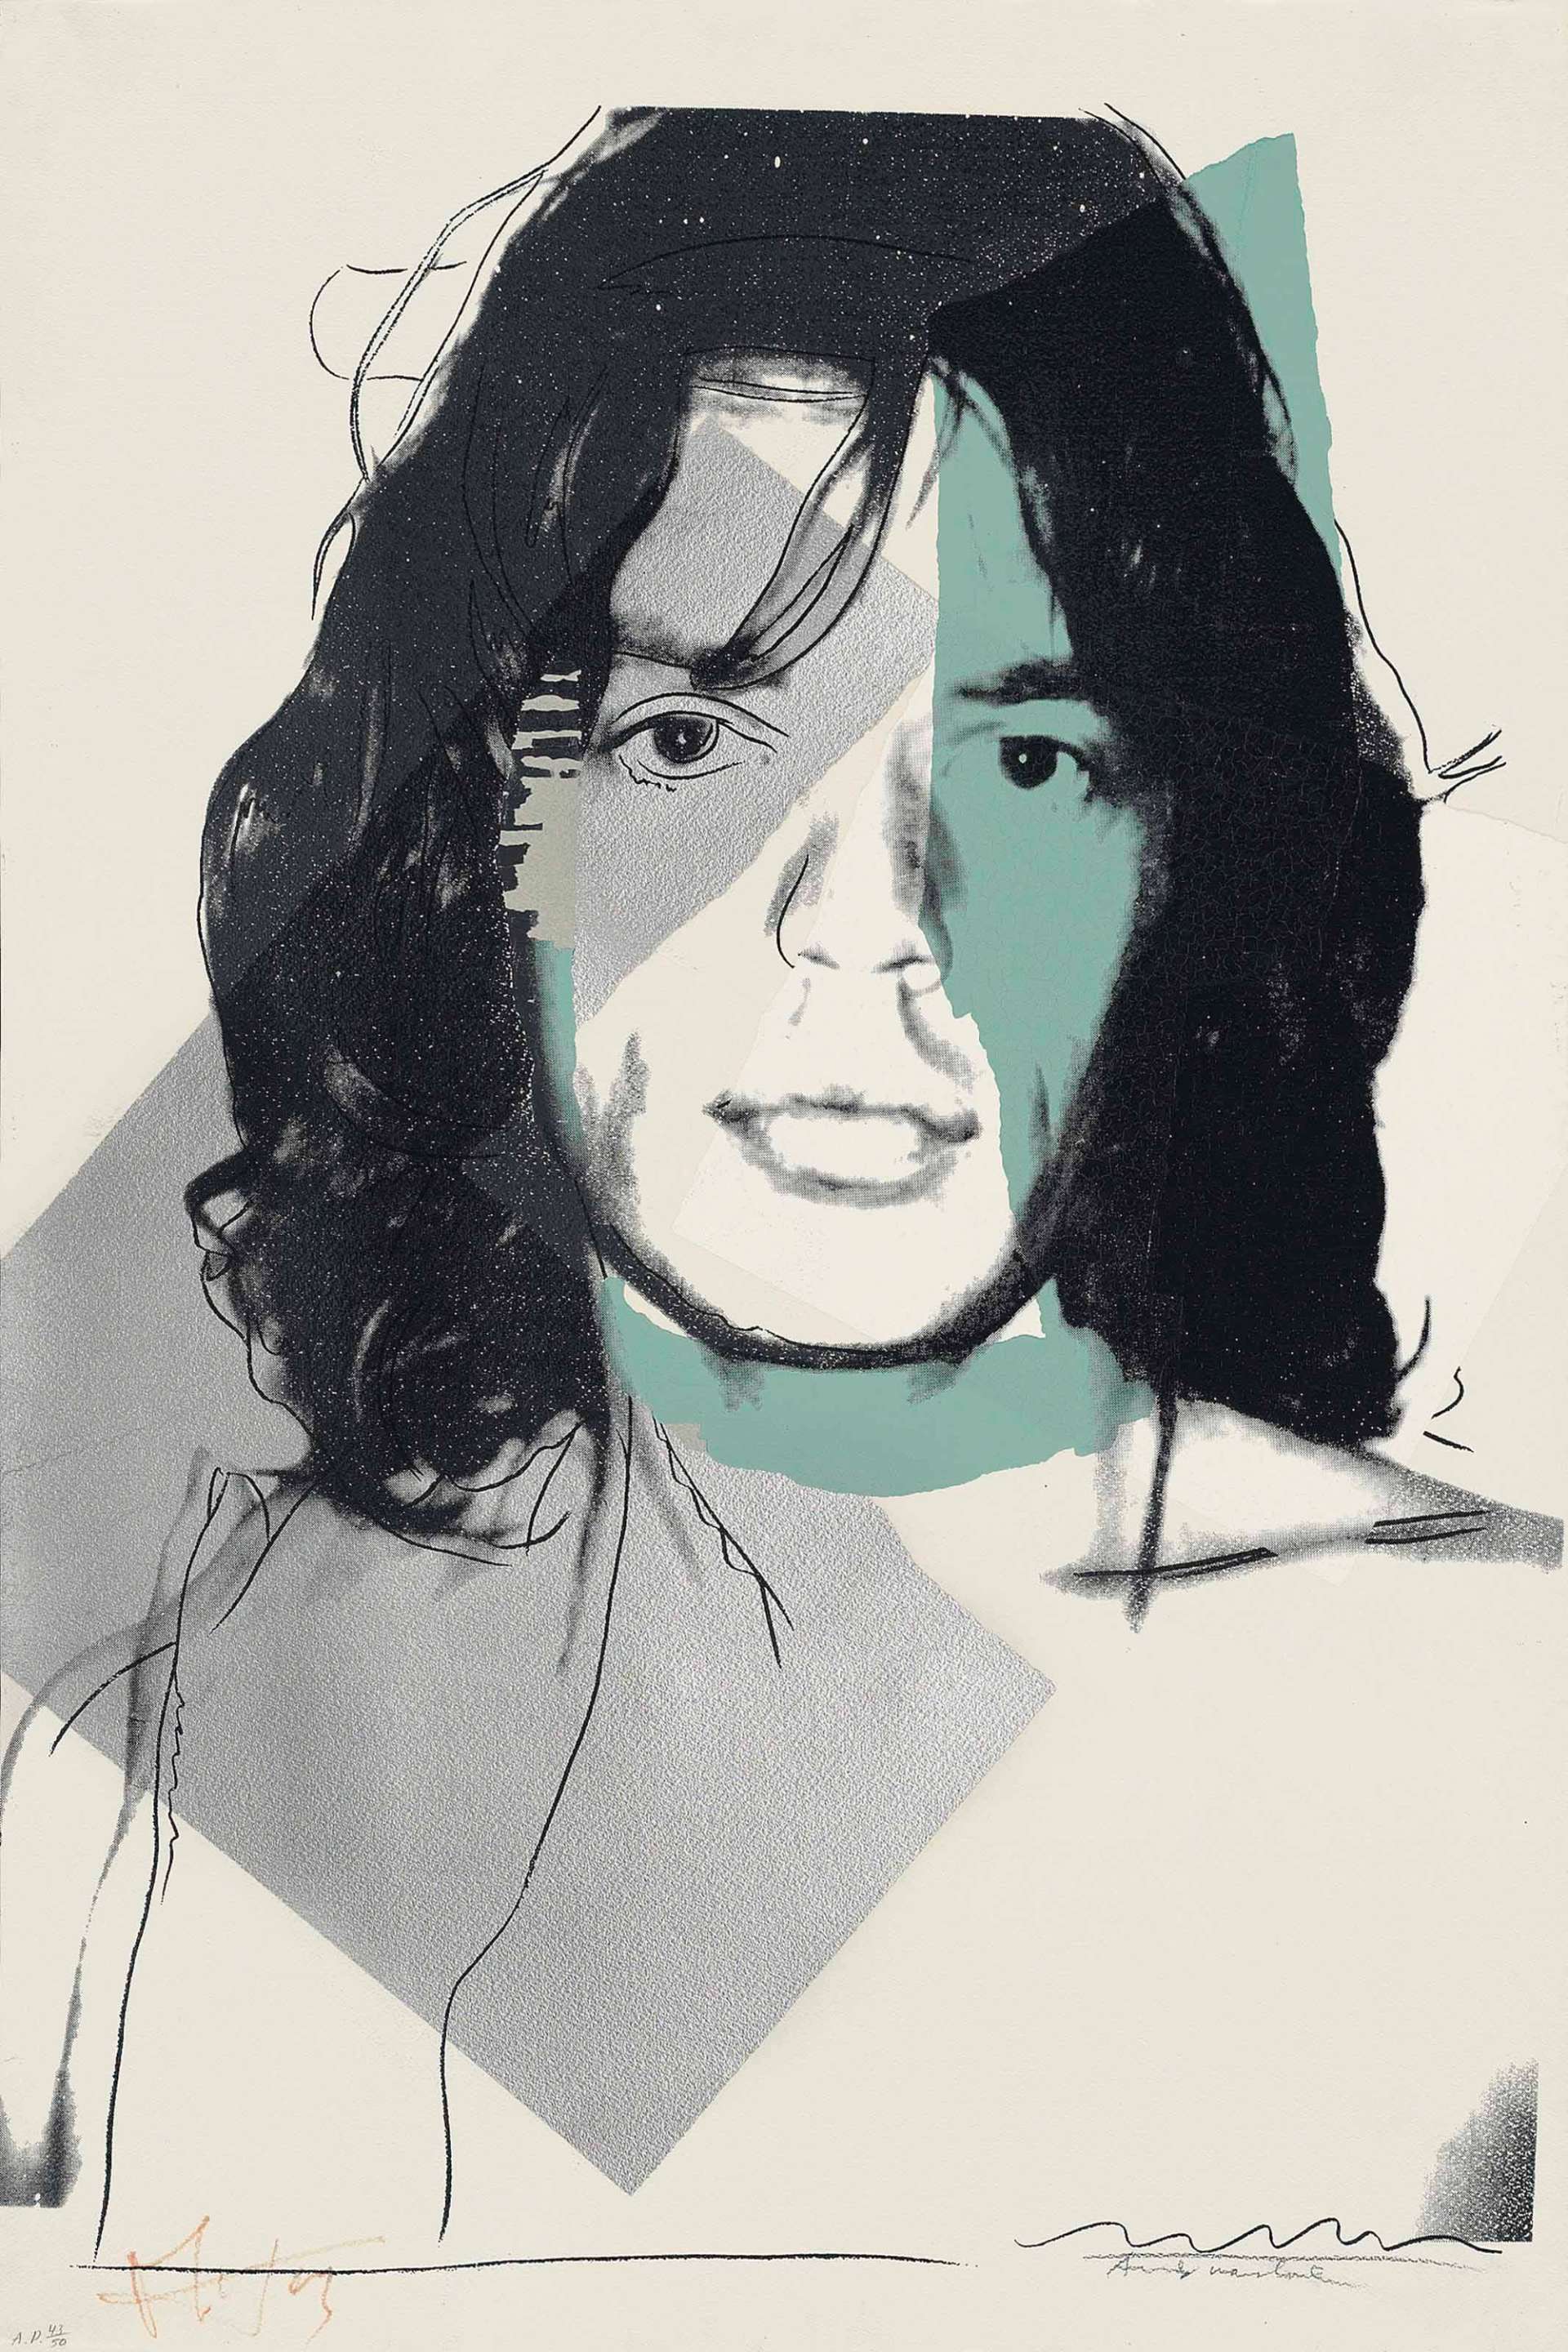 A screenprint by Andy Warhol depicting Mick Jagger in black ink against a background of collaged colour panels in grey and teal blue. The print is signed by both Warhol and Jagger at the bottom of the composition.